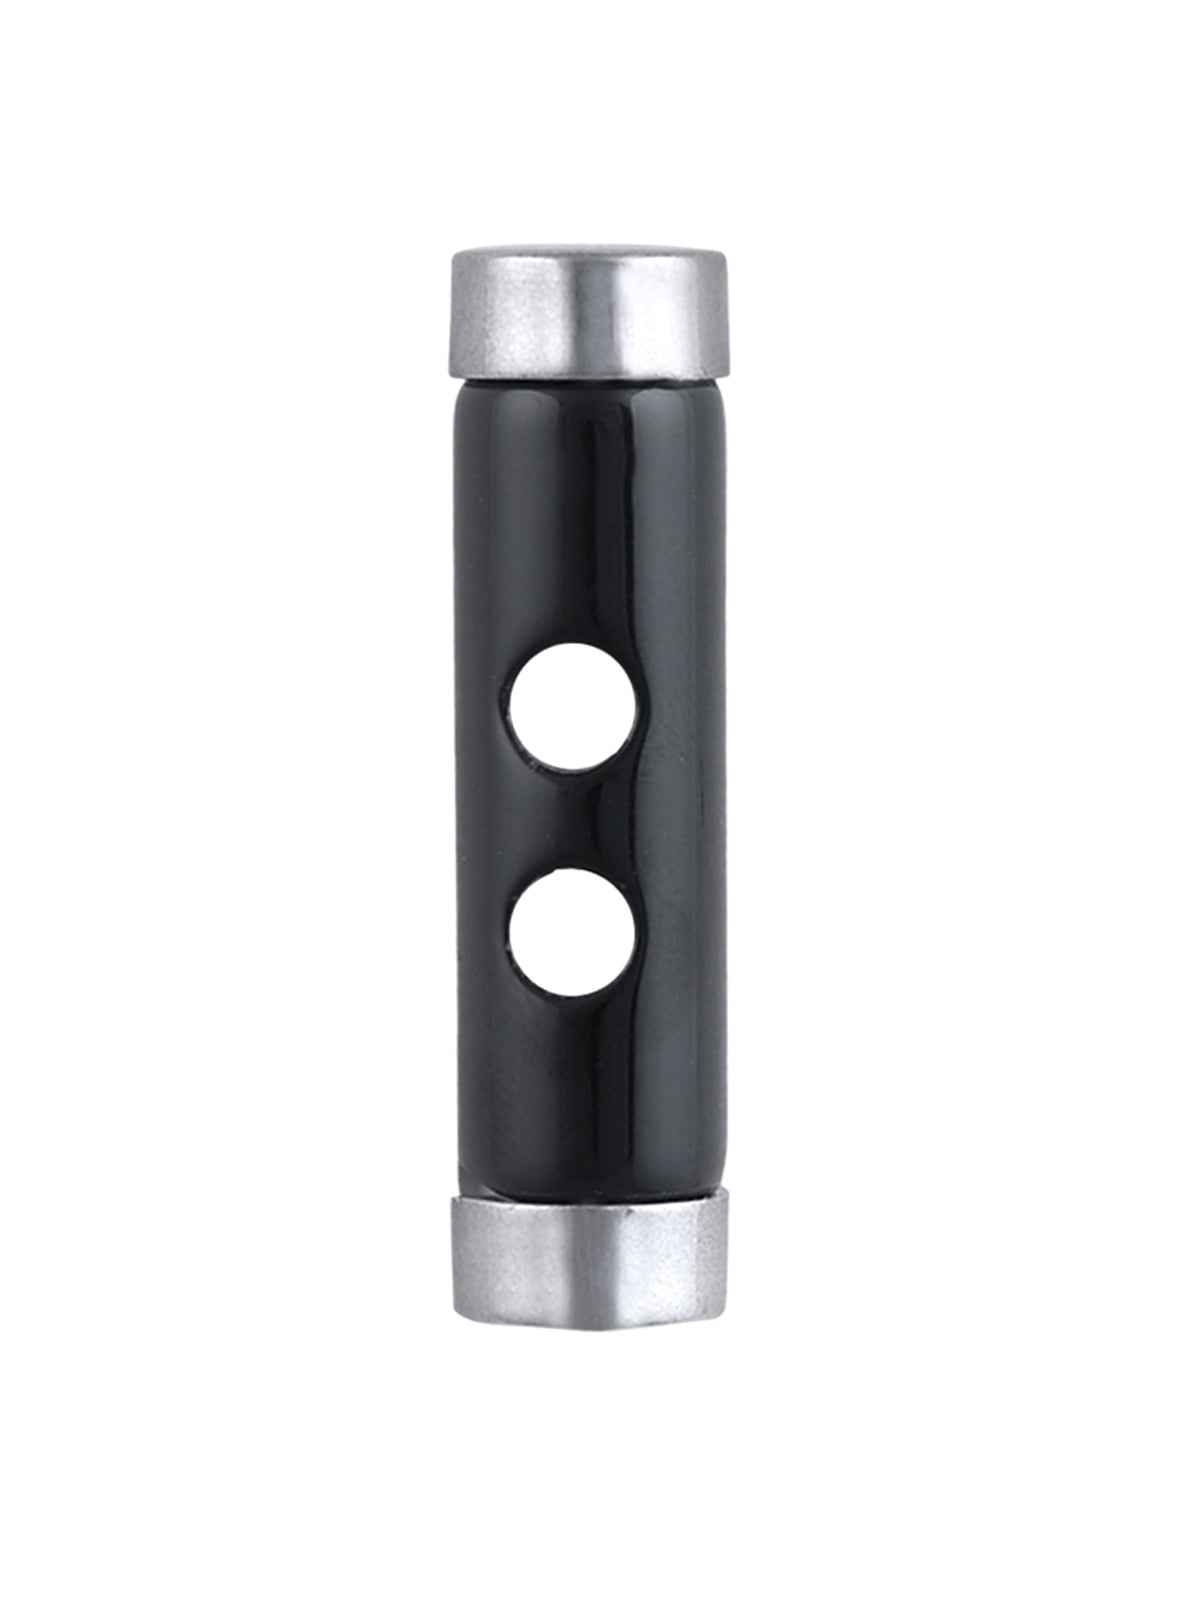 2-Hole Black Cylindrical Shape Toggle Button with Silver Caps